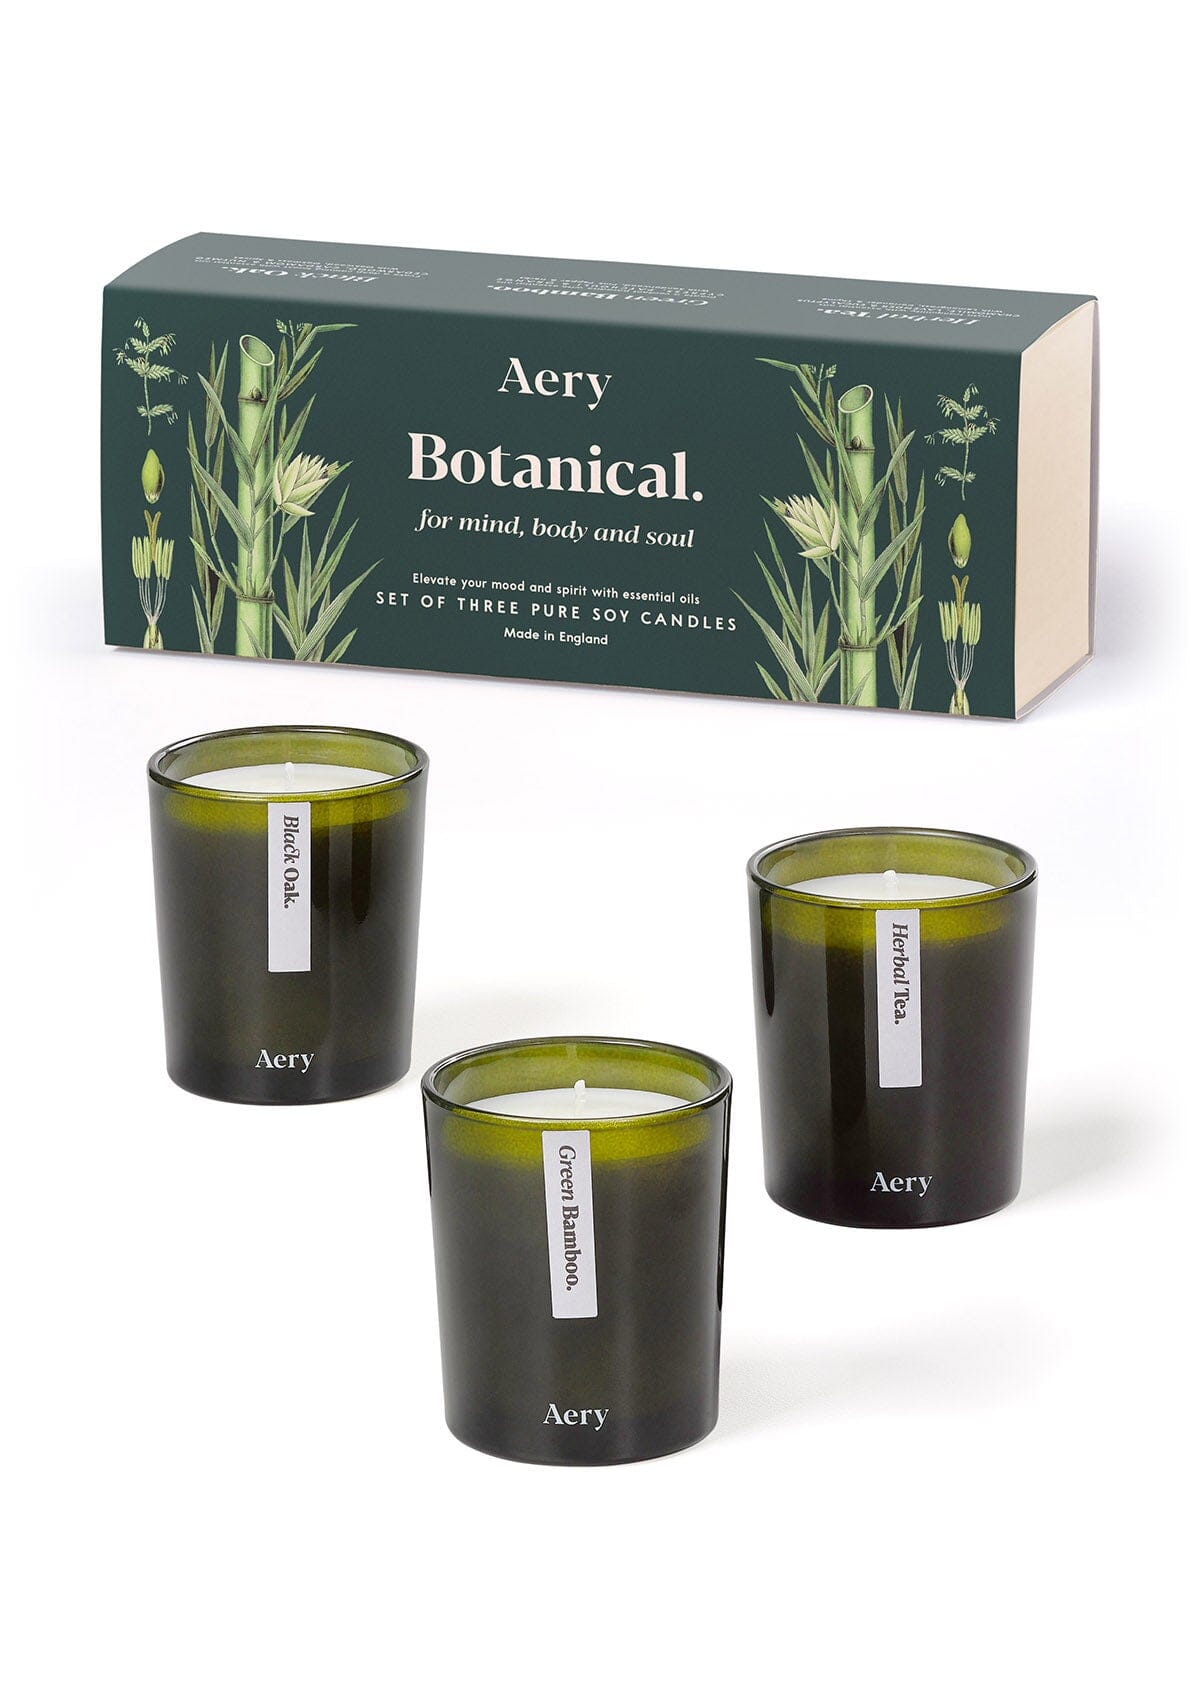 Green Botanical candle set of three by Aery displayed by product packaging on white background 